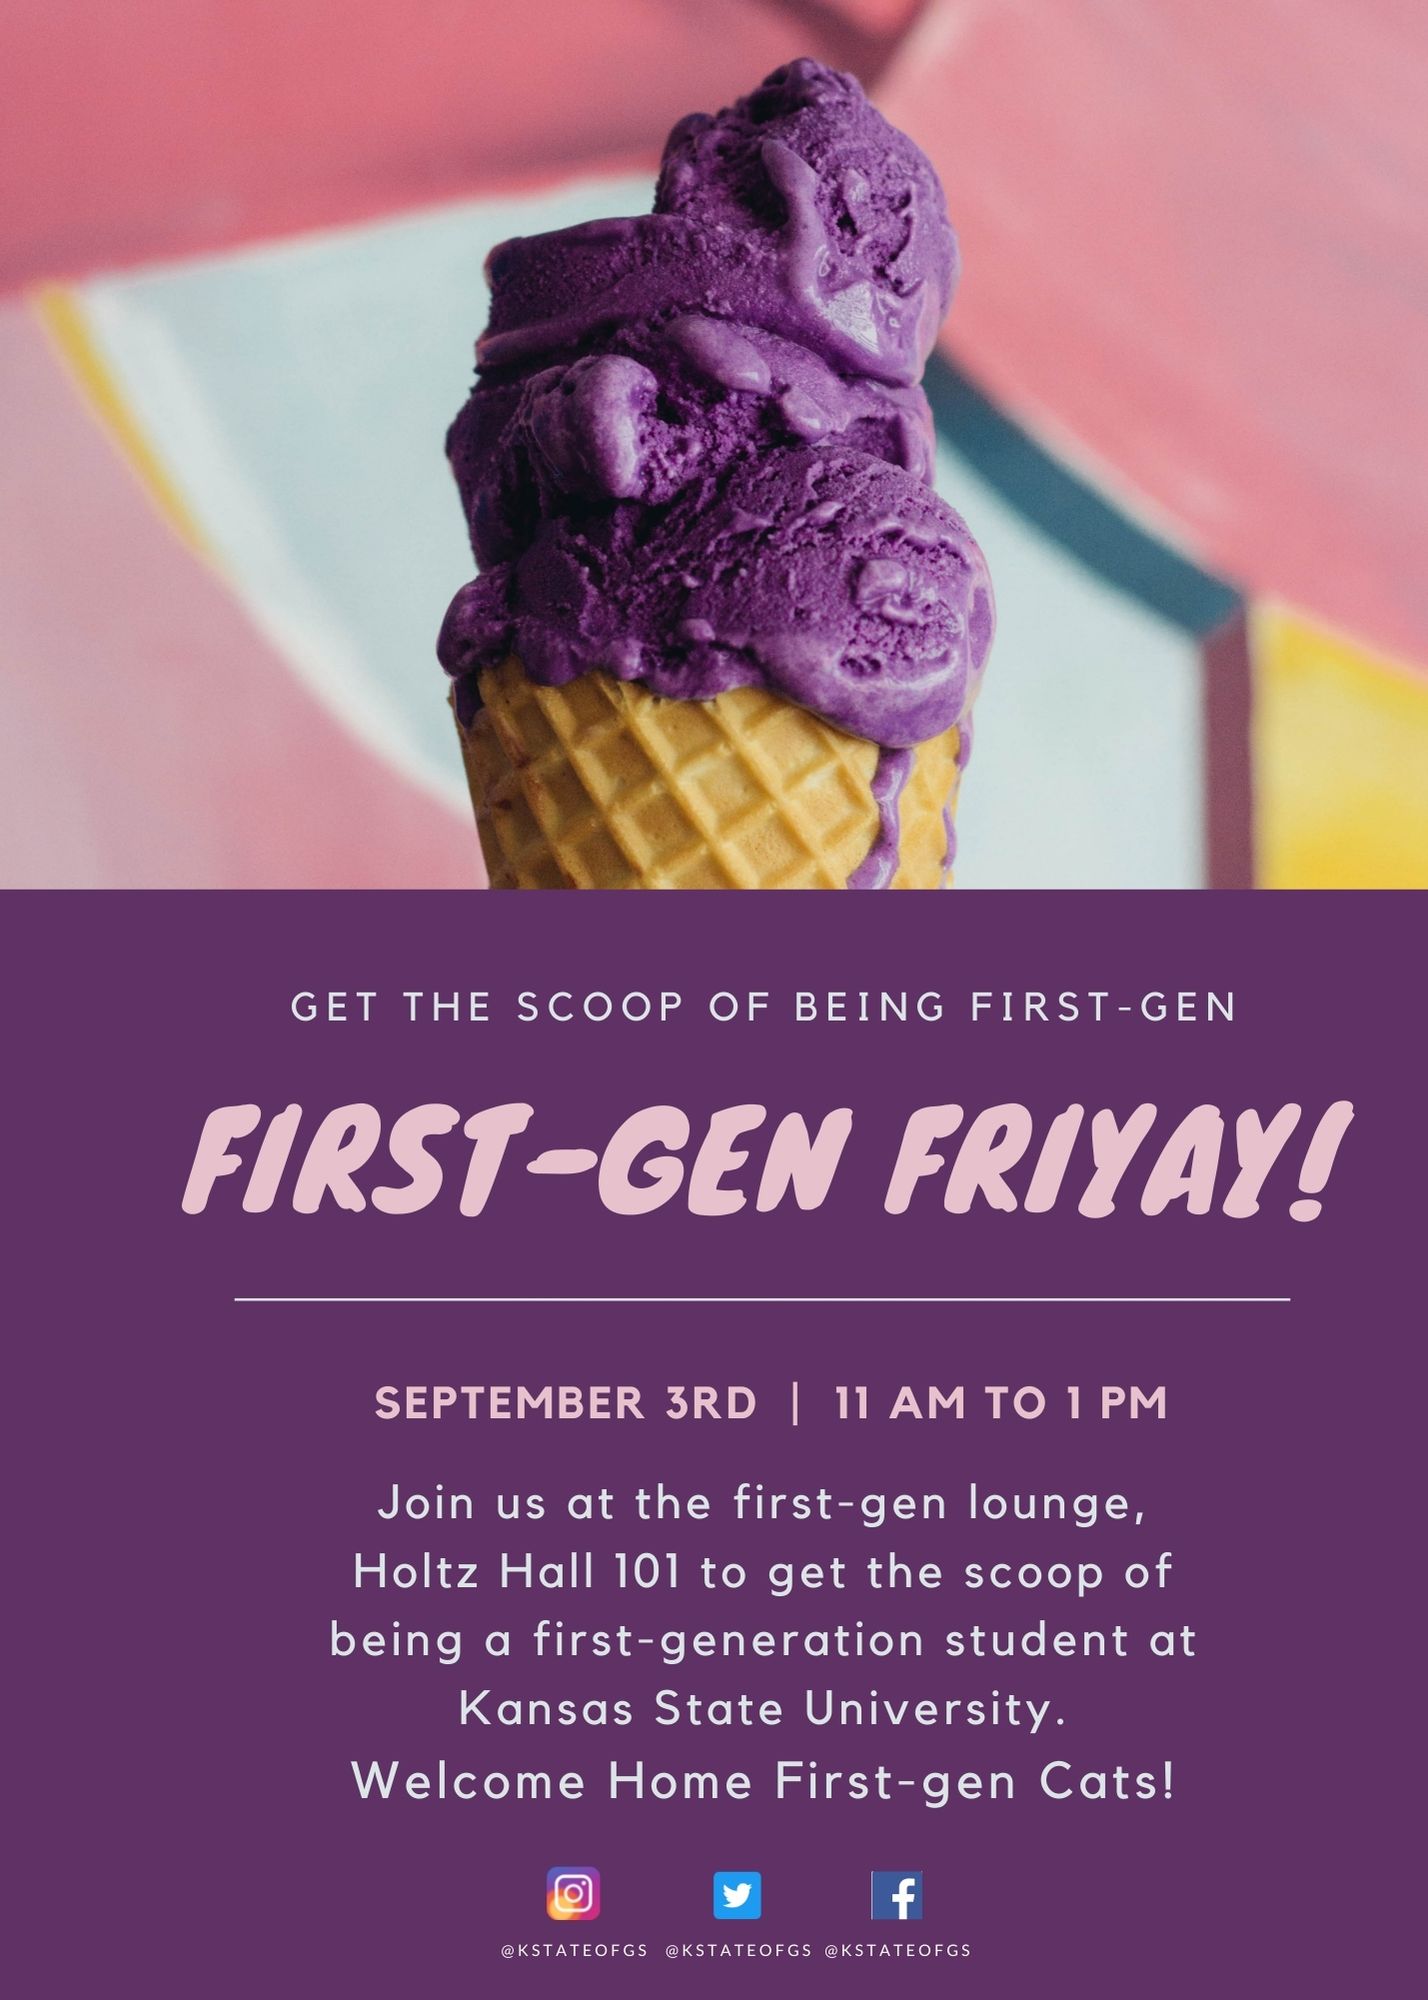 first-gen fri-yay poster with a puprle icecream on it.